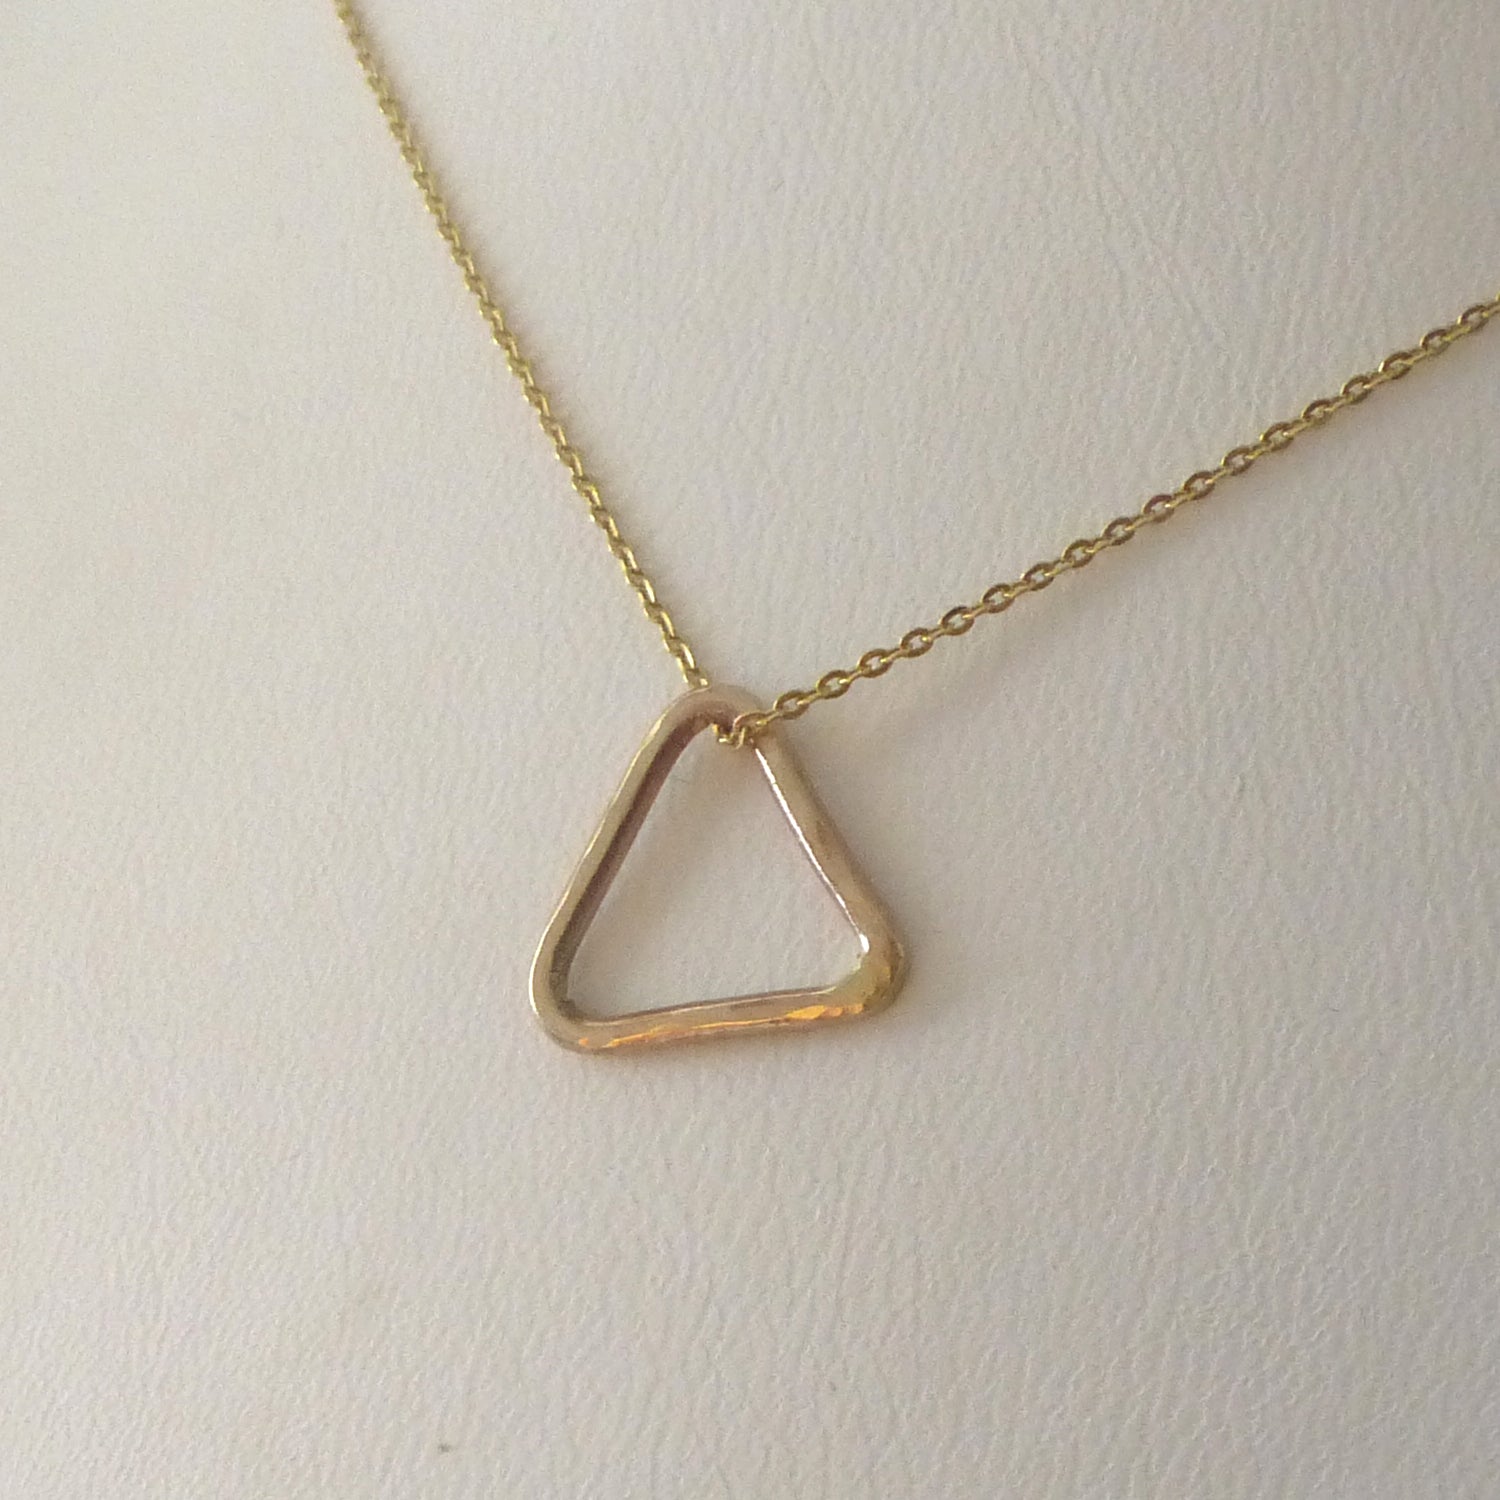 14k Gold Italy Mirror Finish Triangle C Link Pendant Chain Necklace 24in  New 8gr | eBay